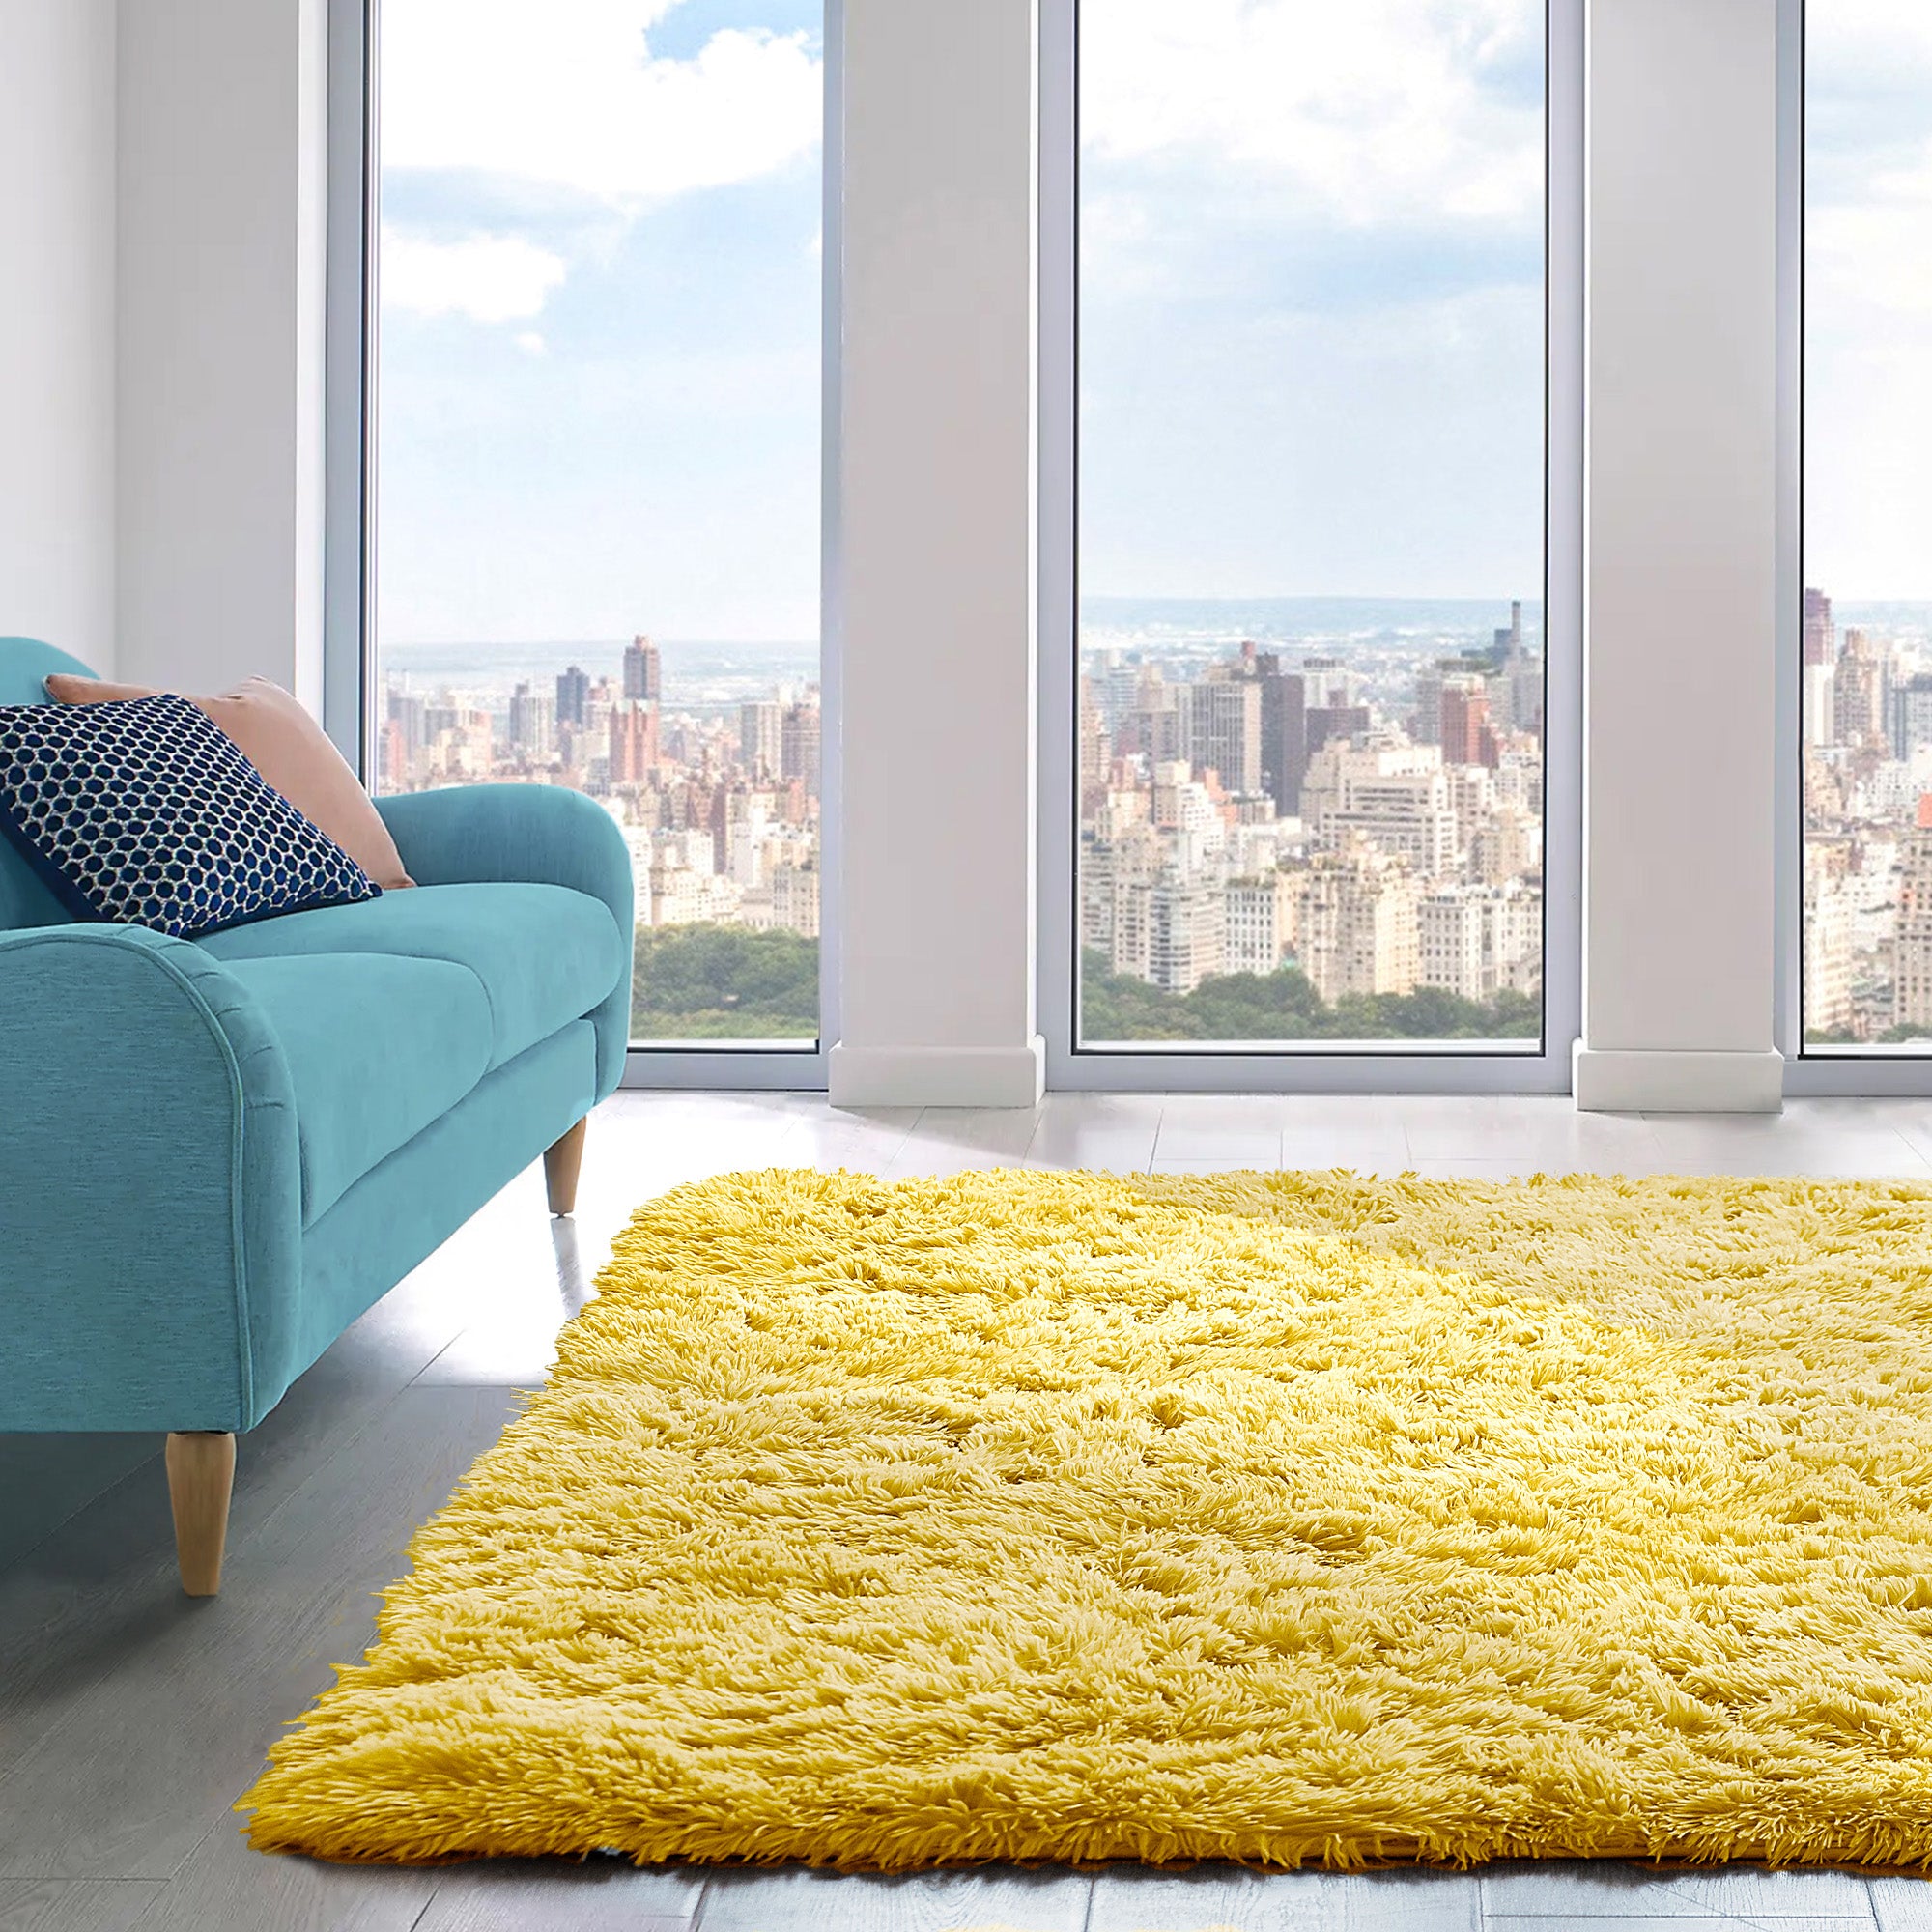 The Home Collection Alaska Basic Rug - 80x150 - Yellow 1 Shaws Department Stores